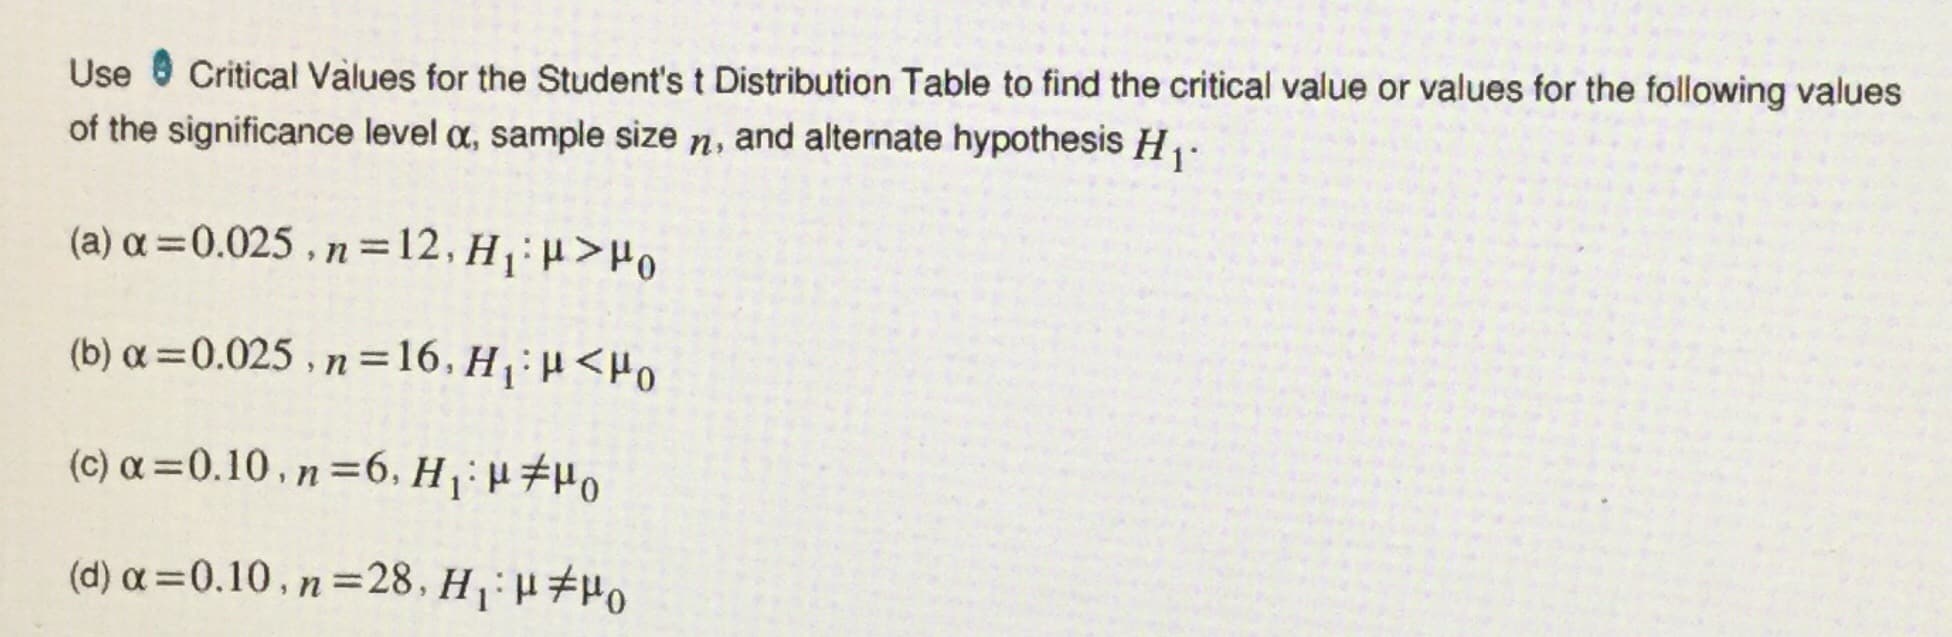 Critical Values for the Student's t Distribution Table to find the critical value or values for the following values
Use
of the significance level o, sample size n, and alternate hypothesis Hi
(a) o 0.025, n = 12, H1 >Ho
(b) o 0.025, n= 16, H
HHo
(c) a 0.10. n6. H1 Ho
(d) a 0.10. n 28, H1 HHo
